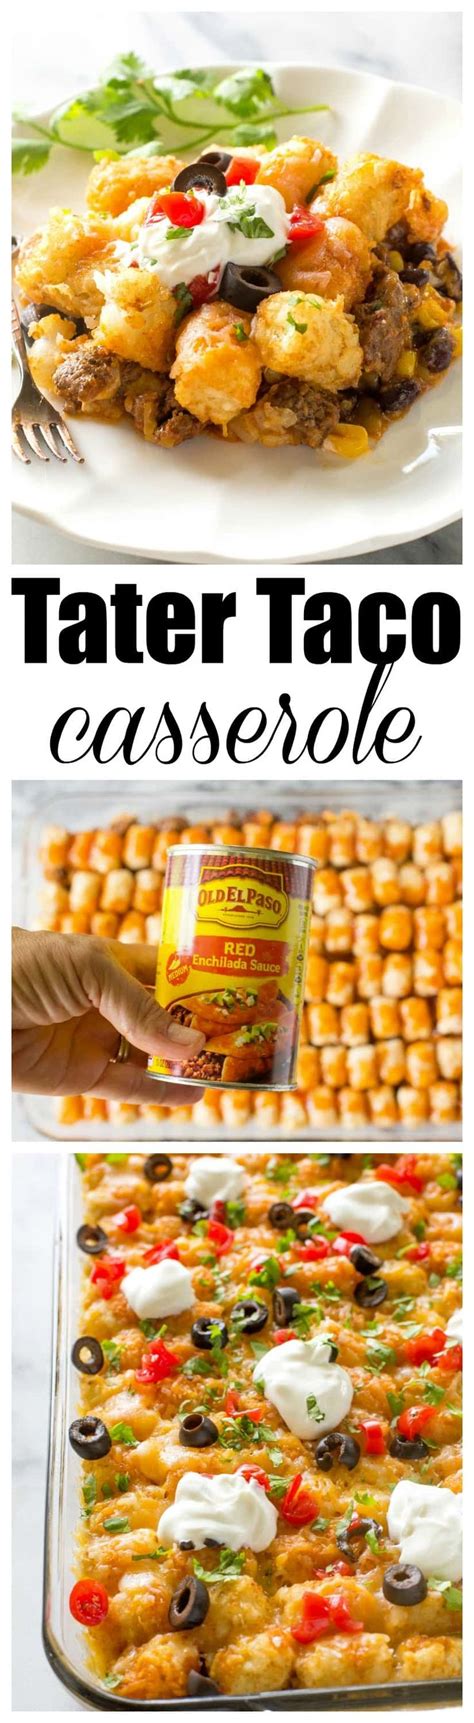 Tater Taco Casserole Video The Girl Who Ate Everything Recipe